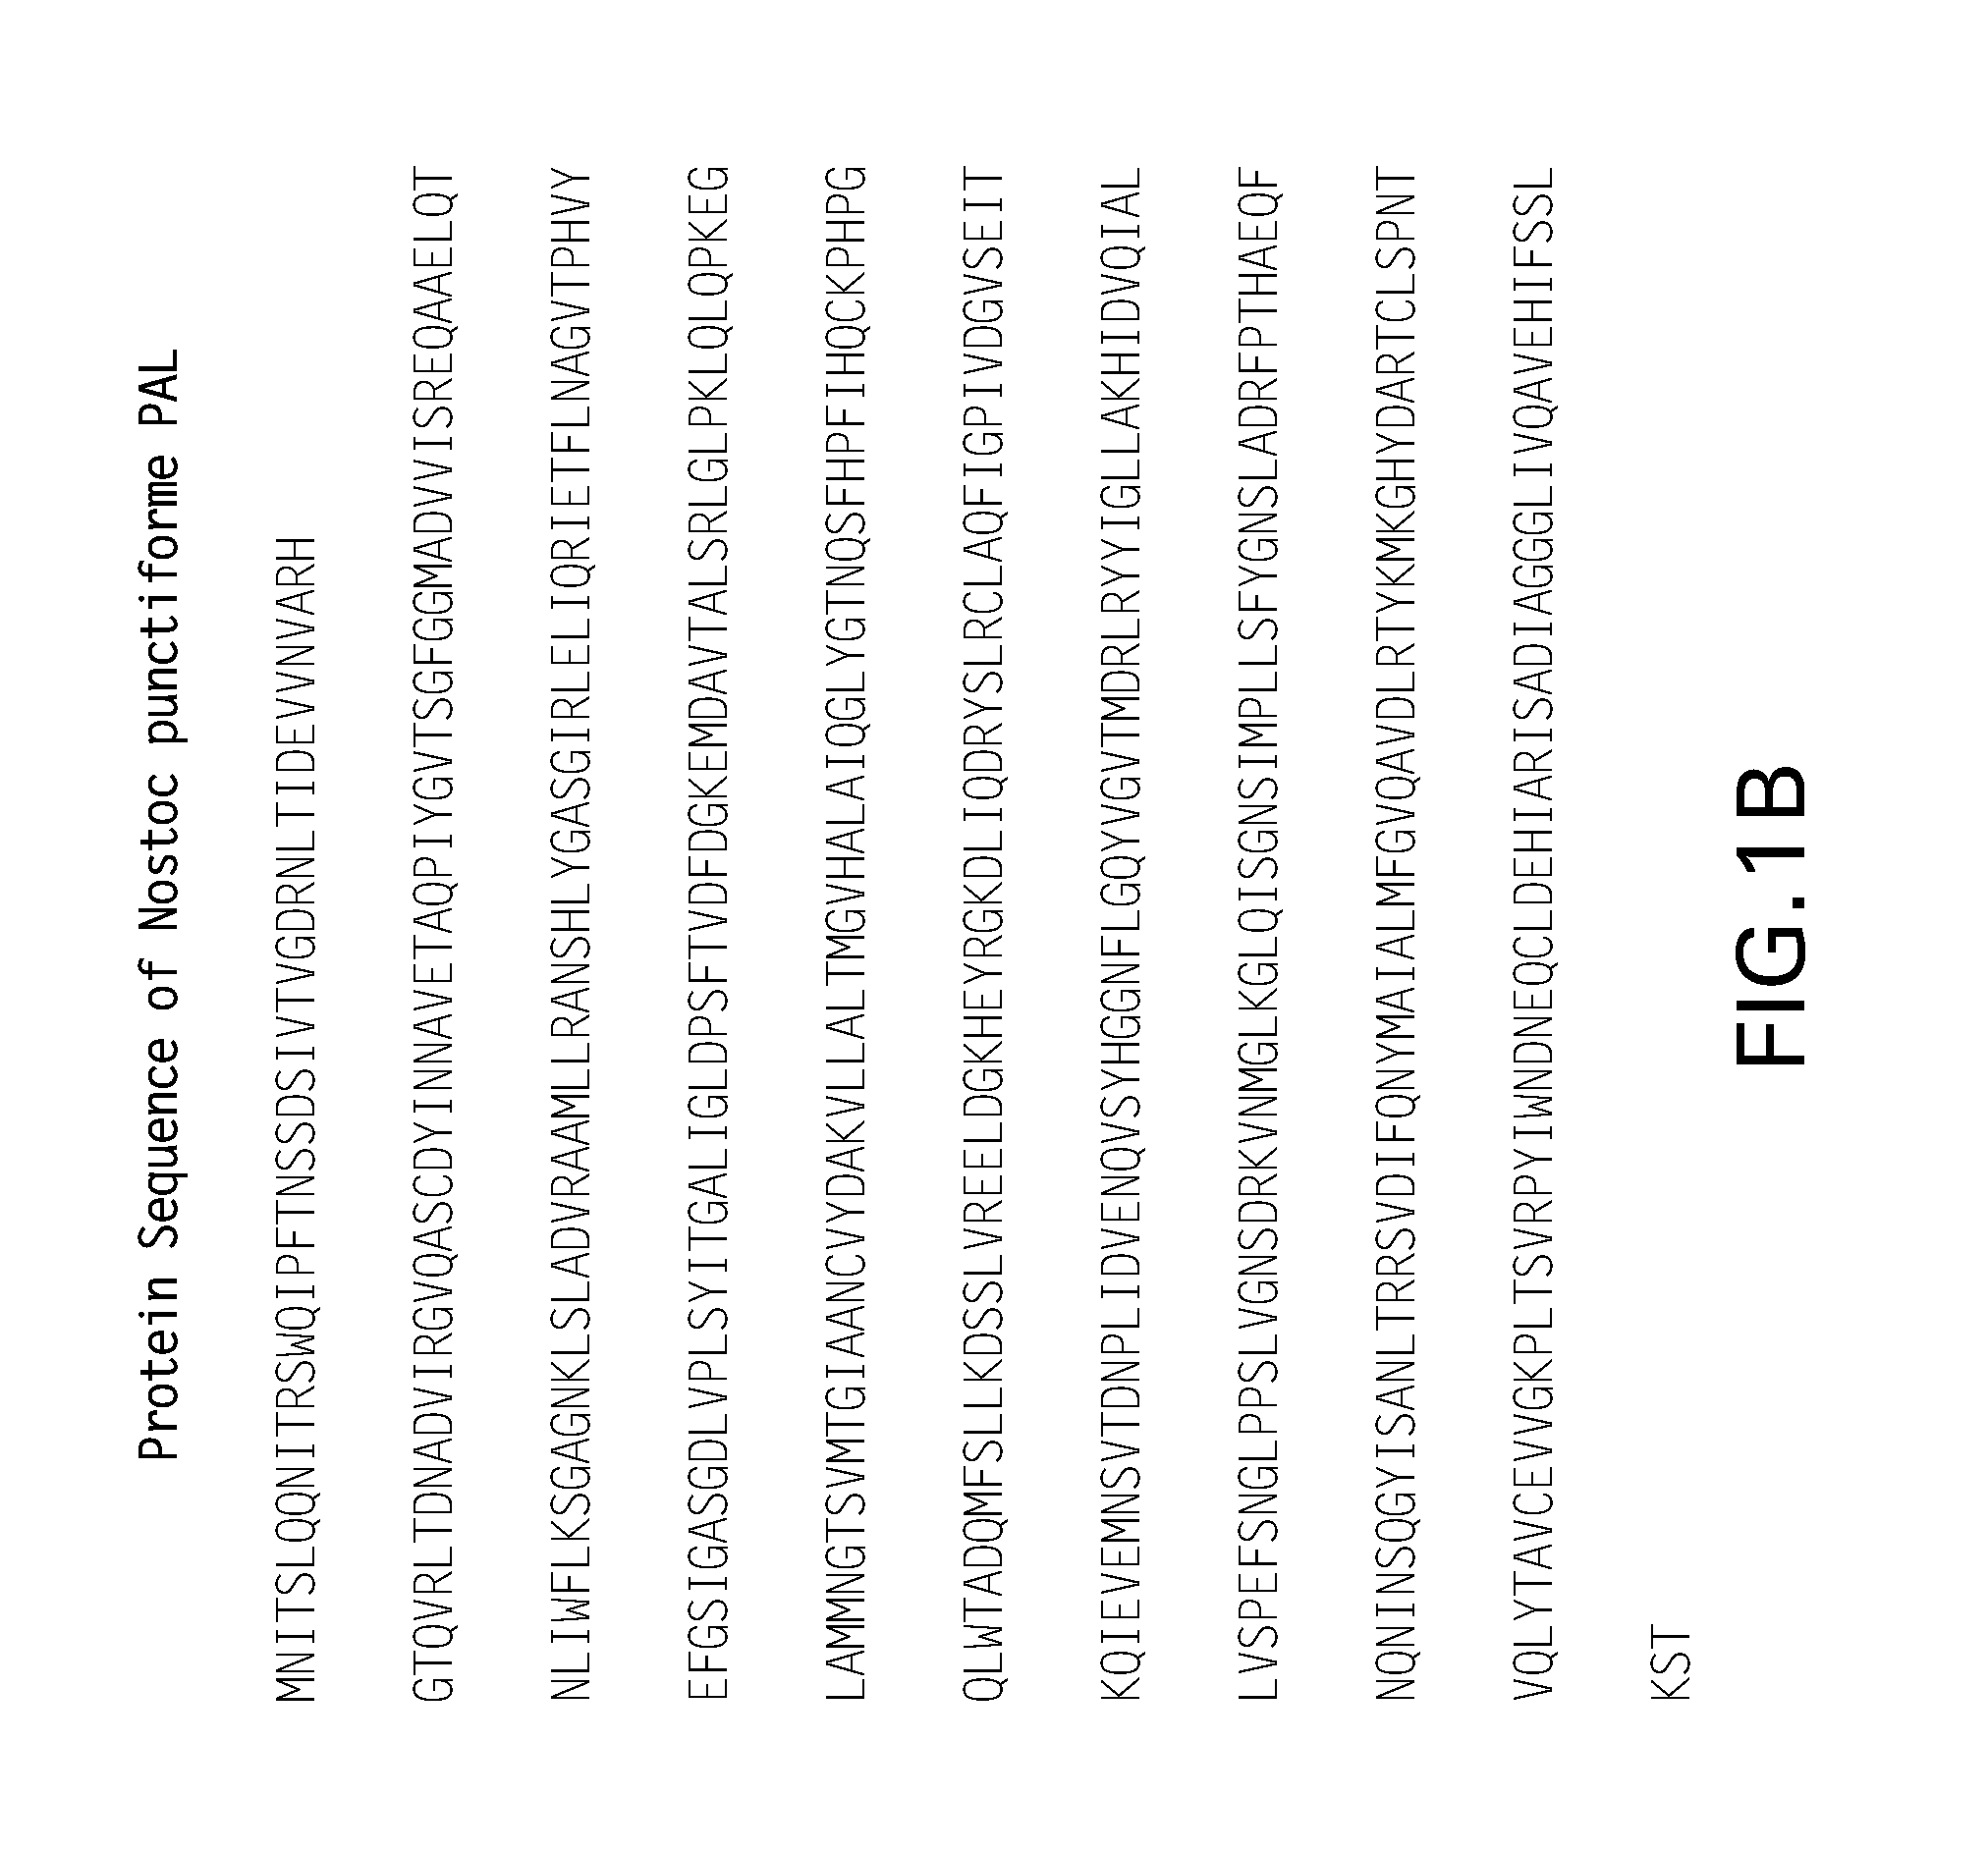 Compositions of prokaryotic phenylalanine ammonia-lyase variants and methods of using compositions thereof